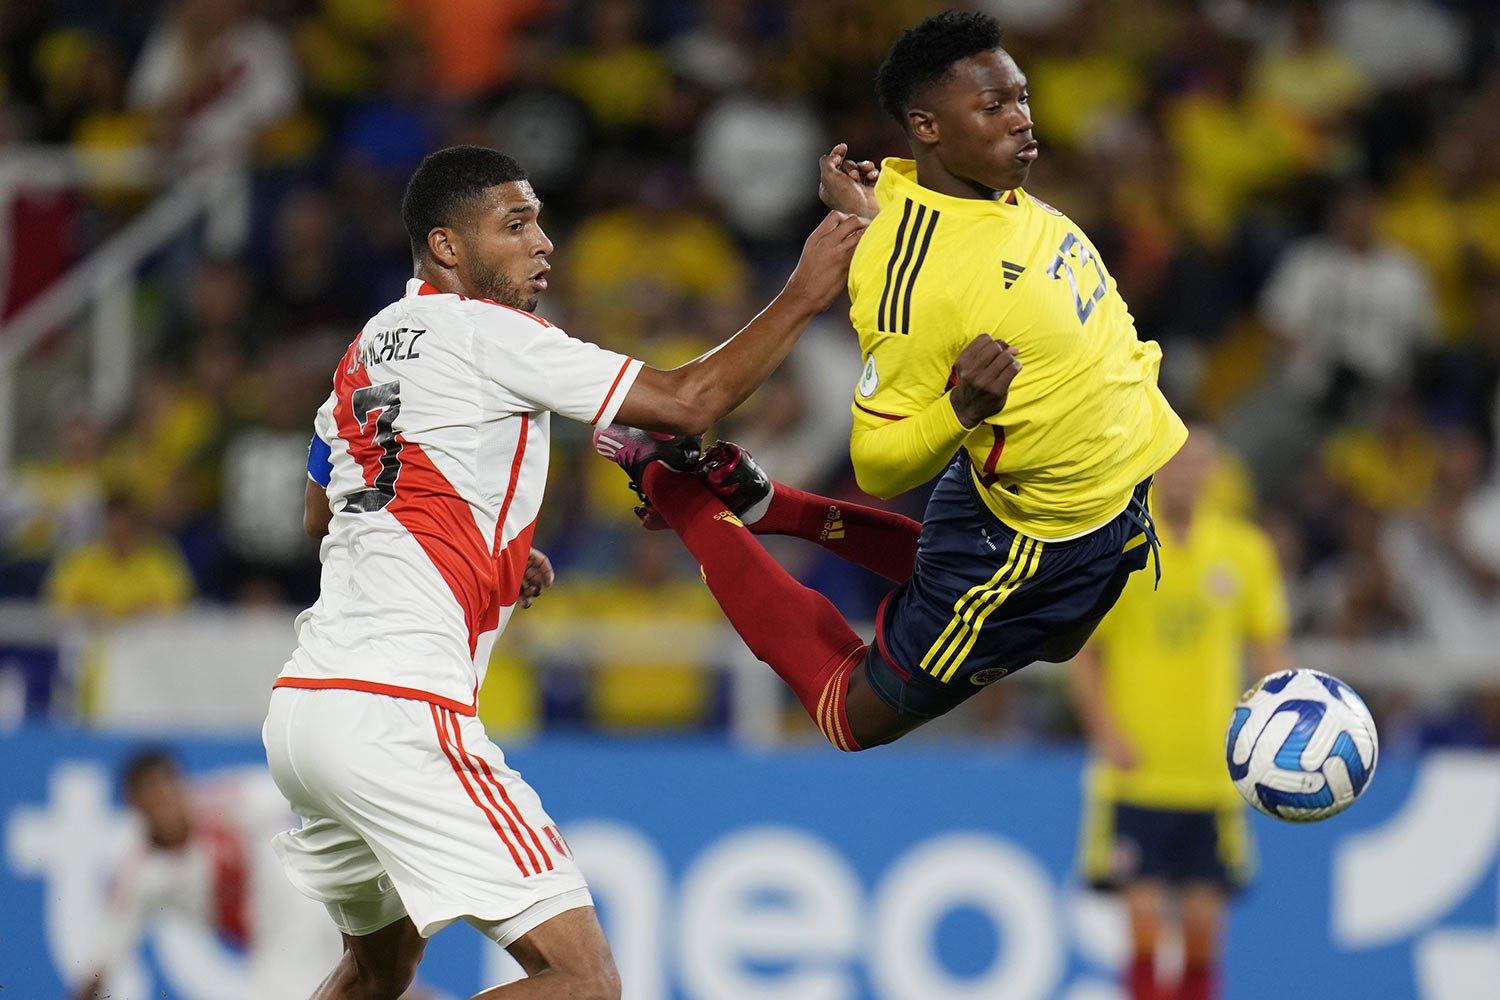  Peru's Jose Sanchez, left, and Colombia's Jorge Cabezas battle for the ball during a South America U-20 soccer match in Cali, Colombia, Jan. 21, 2023. (AP Photo/Fernando Vergara) 